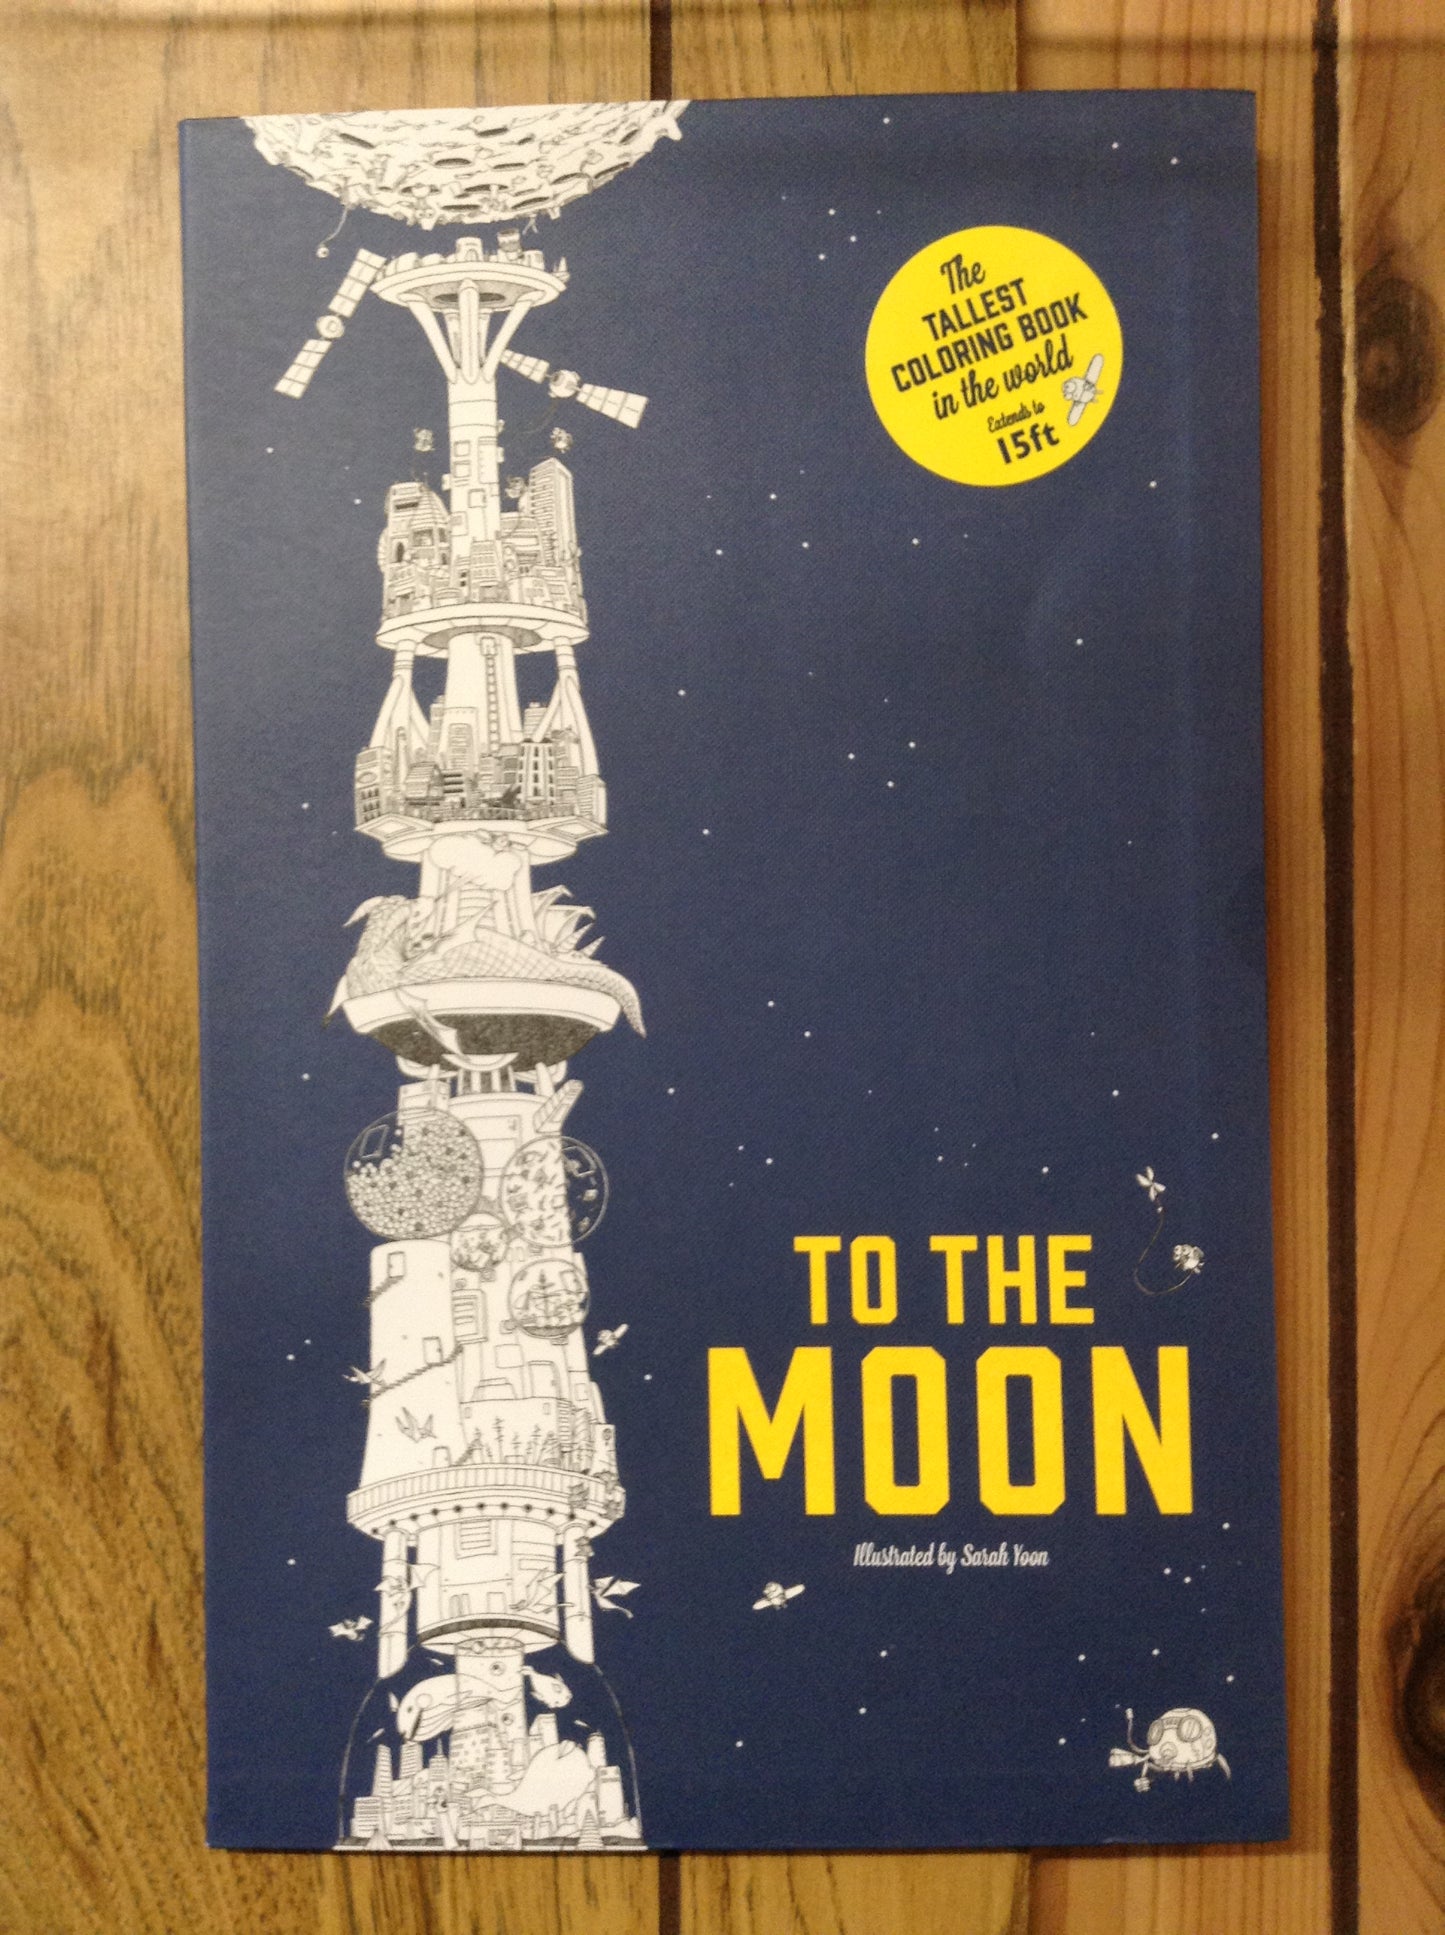 To The Moon: The Tallest Coloring Book in the World